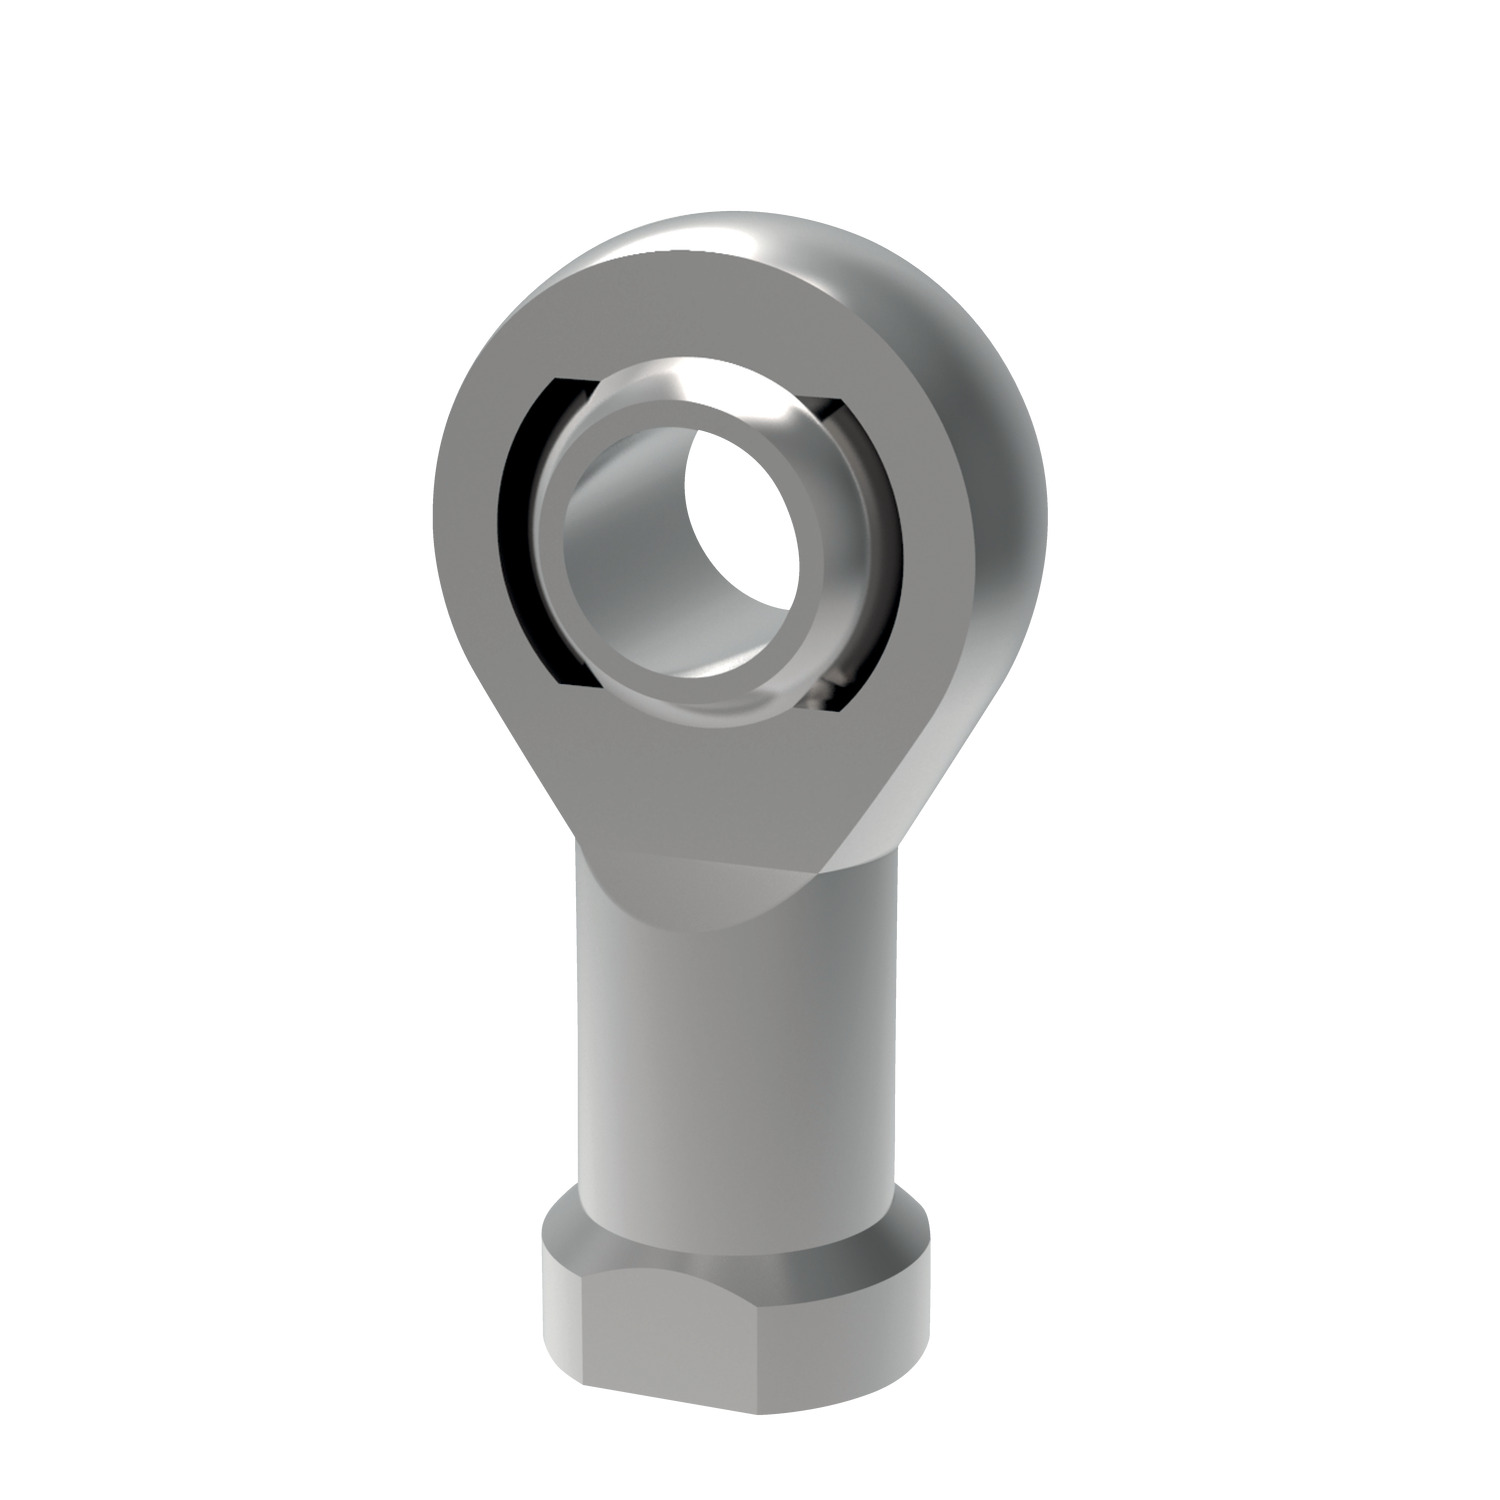 Stainless Heavy-Duty Rod Ends - Female Maintenance free, for tolerances see technical page 123, standard thread is right hand thread.